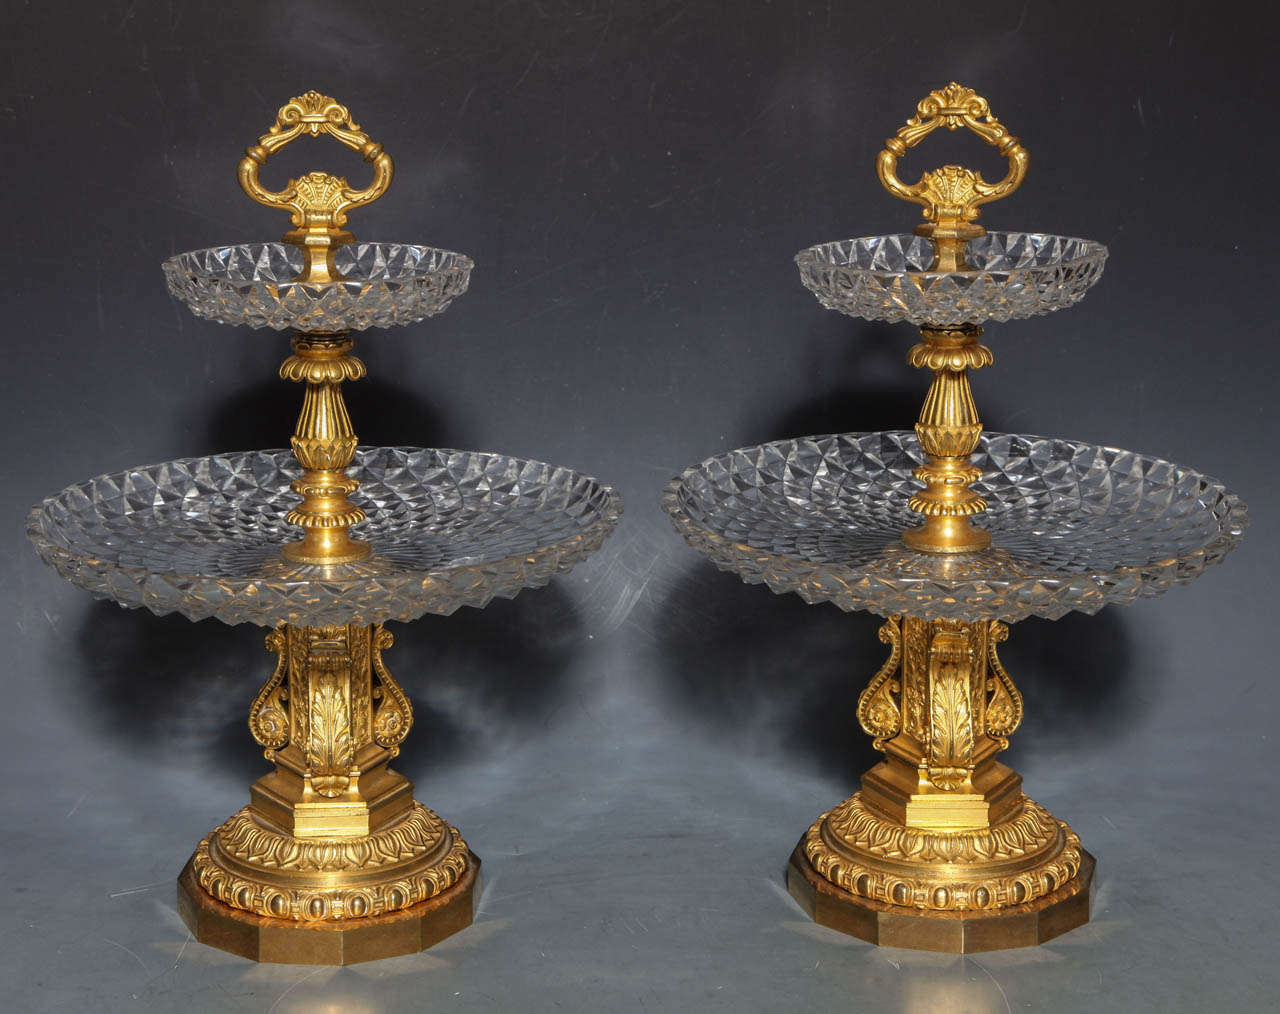 A fine pair of Antique French Neoclassical hand diamond cut Crystal and Dore Bronze Two Tiered Tazzas/Centerpieces, Signed by Pierre-Philippe Thomier (1751–1843). The diamond cut trays sparkle against Dore bronze mounts of the finest quality. The